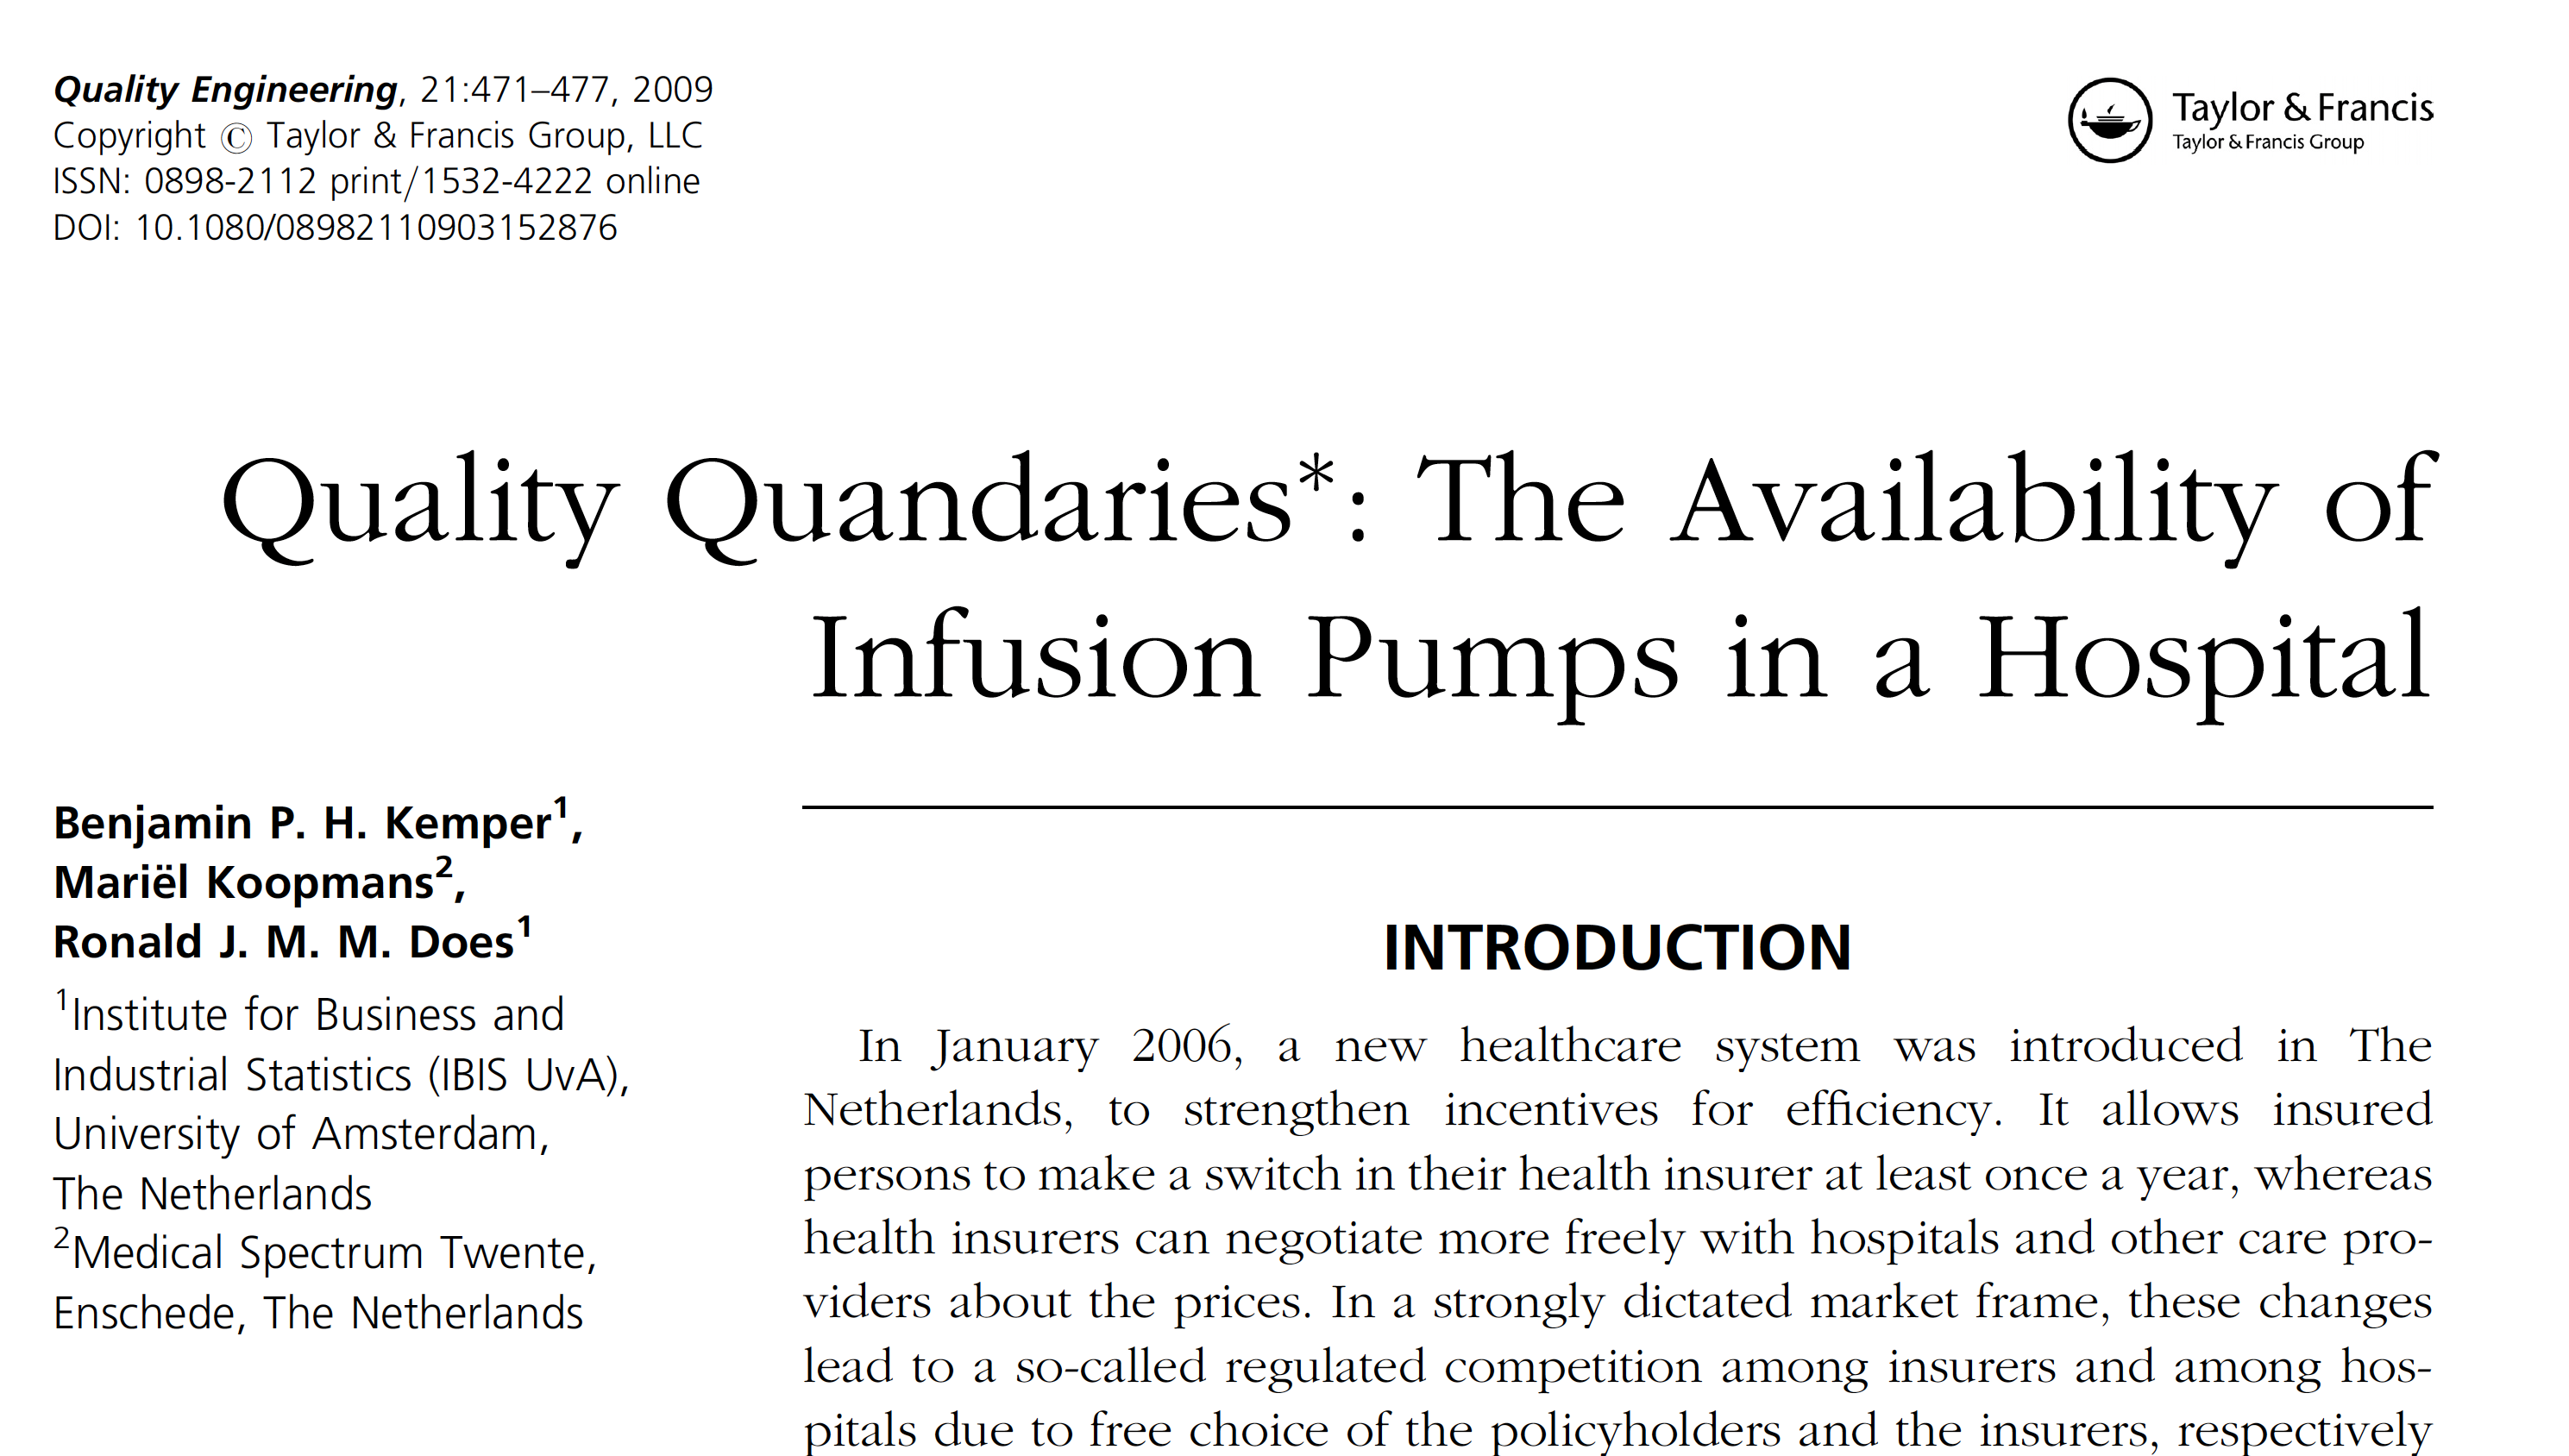 The Availability of Infusion Pumps in a Hospital